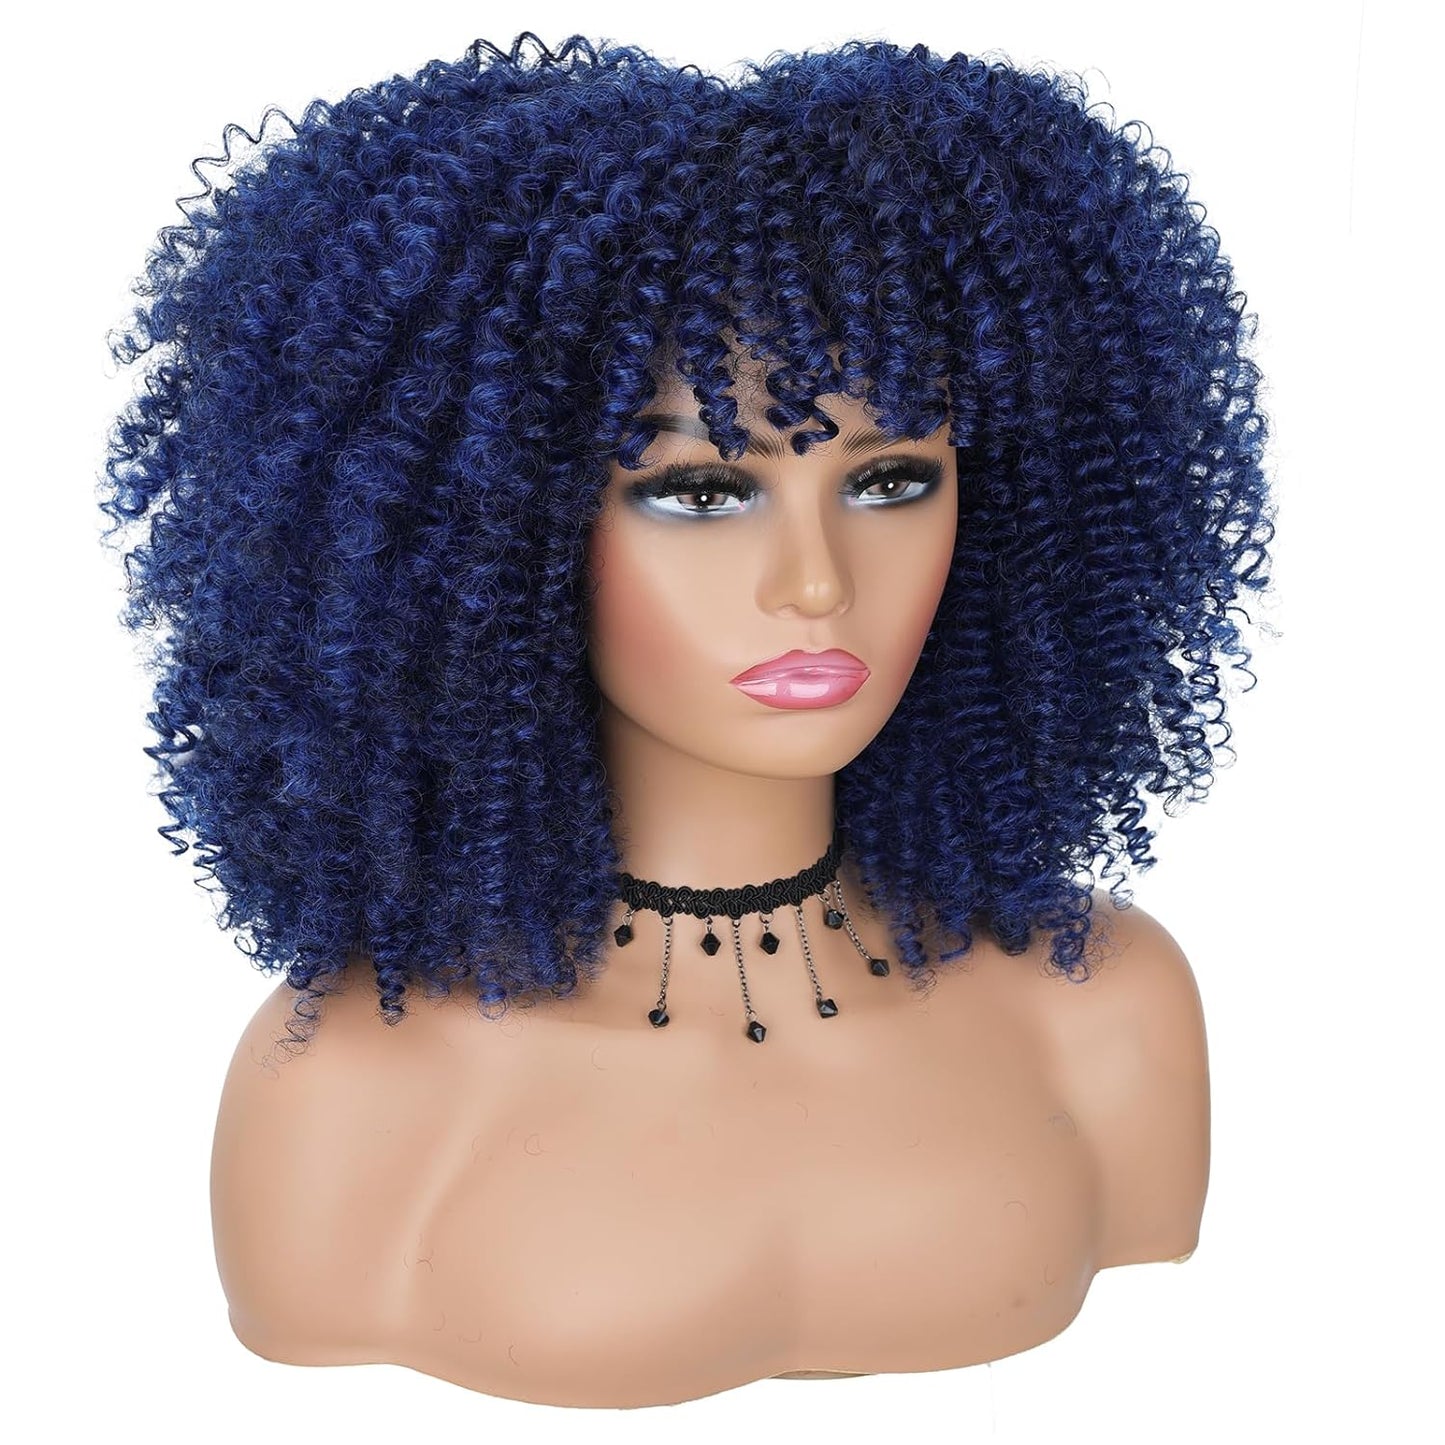 16 Inch Curly. Afro Kinky Wig Synthetic Fiber Glueless Full and Fluffy Long Curly Wig for Fashion Women (16 Inch, Black)